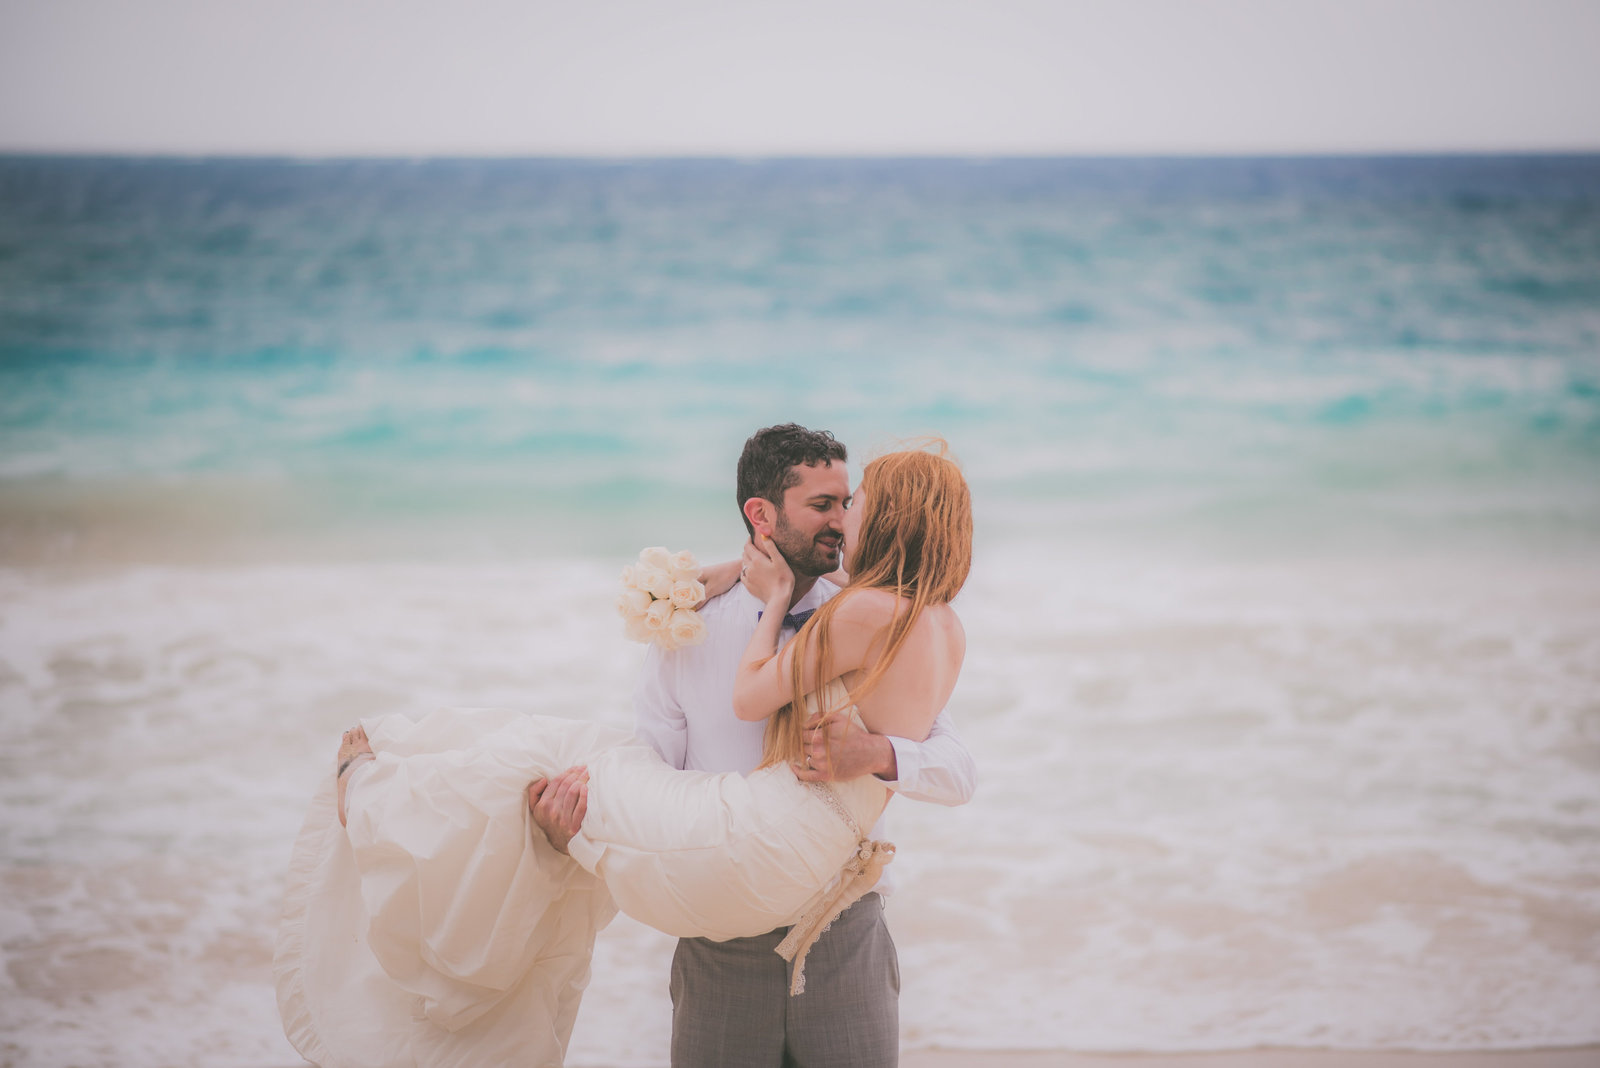 Groom holds bride on Hawaii beach while their faces get close.